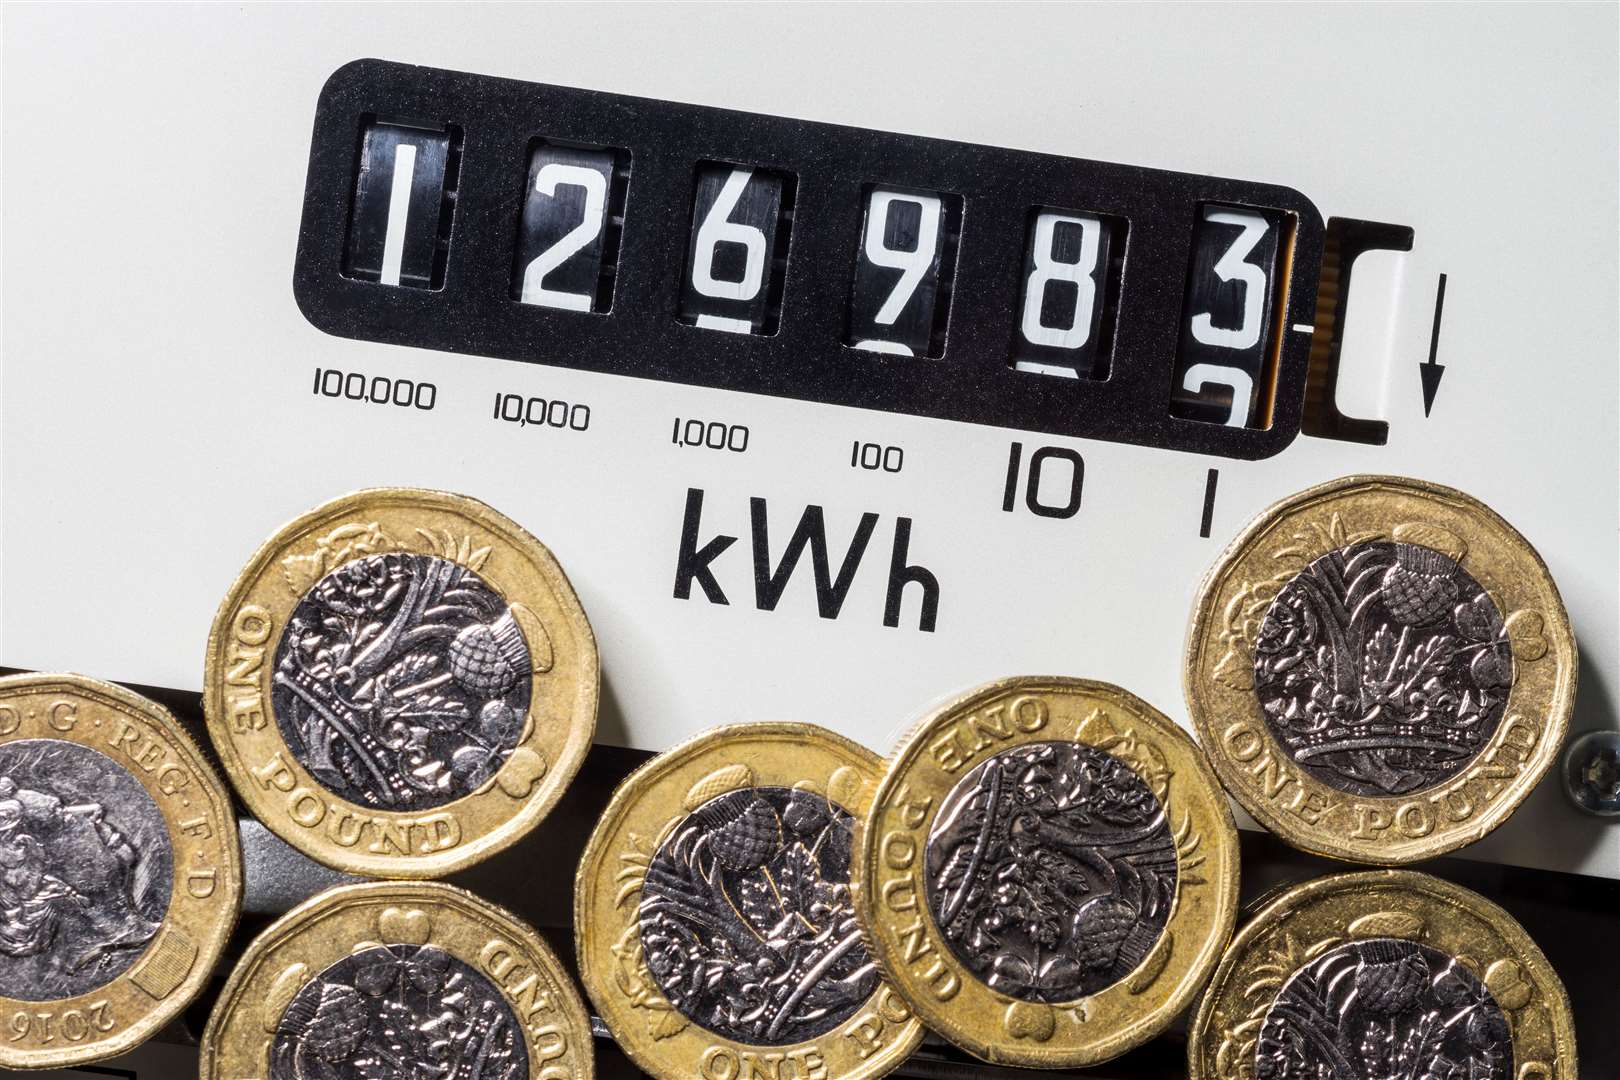 Cost of living payments will be made to people to help them pay for outgoings like energy bills.